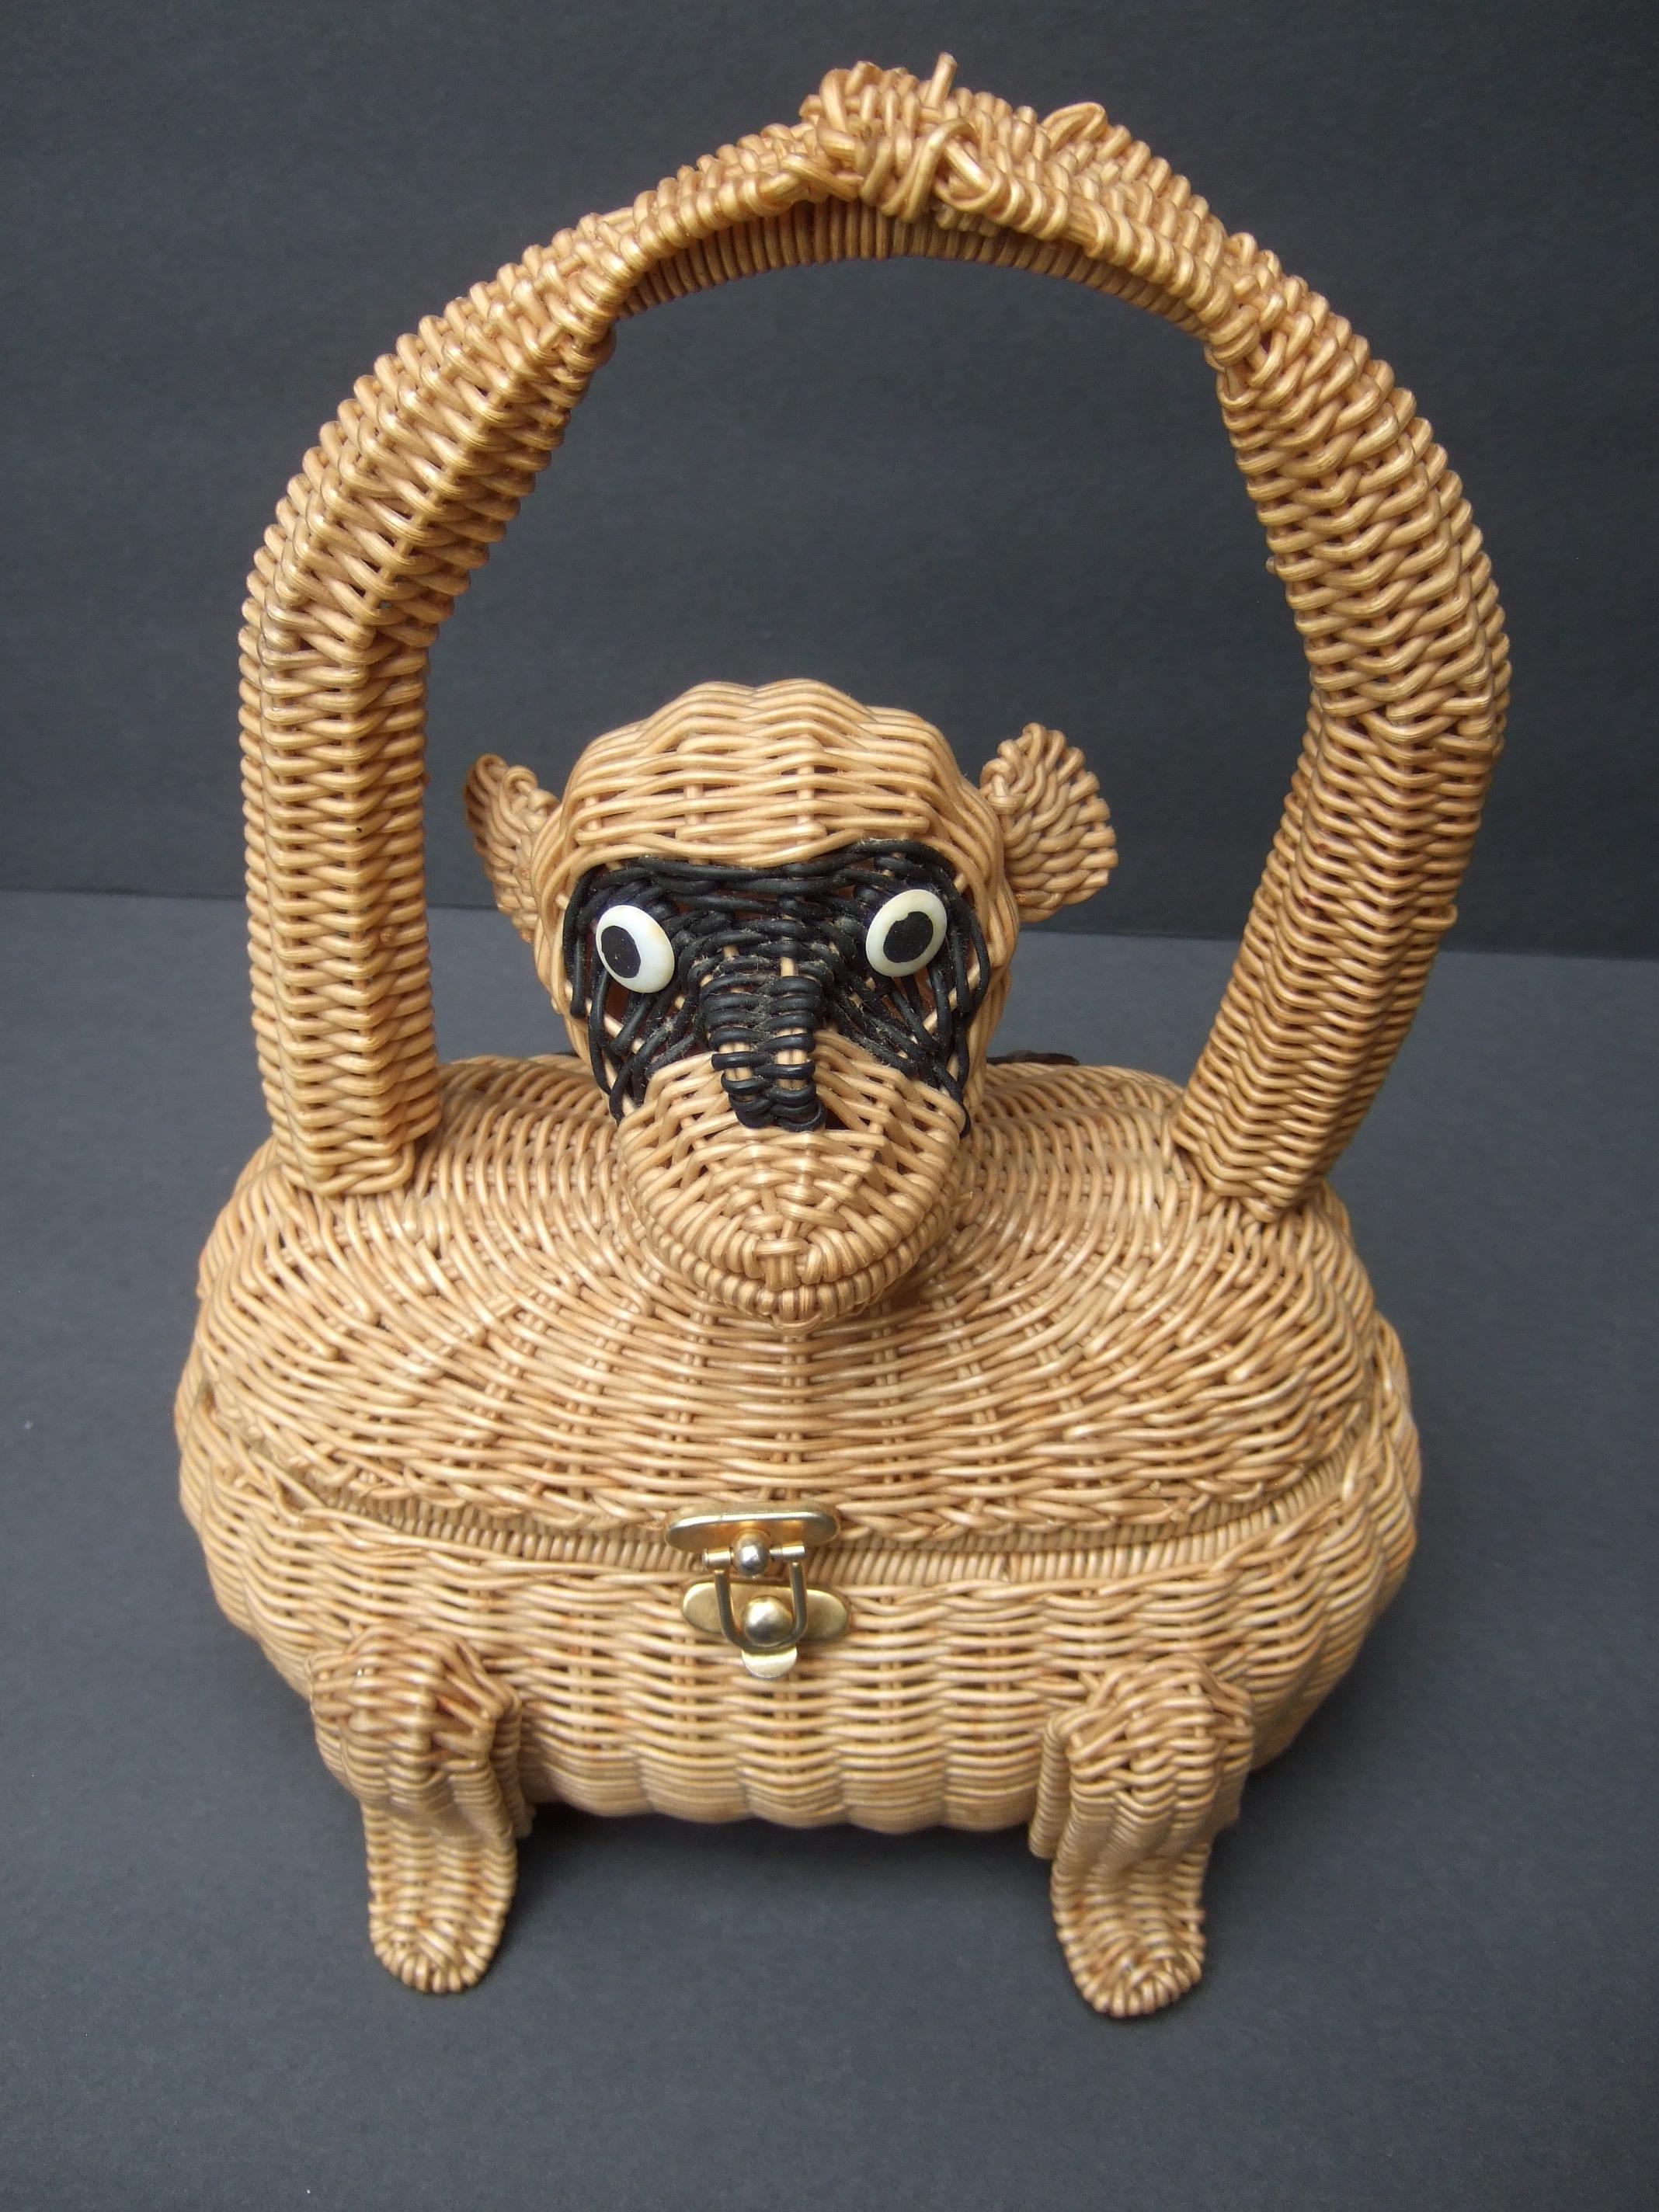 Whimsical Very Rare Wicker Monkey Handbag Designed by Marcus Brothers c 1960 For Sale 4